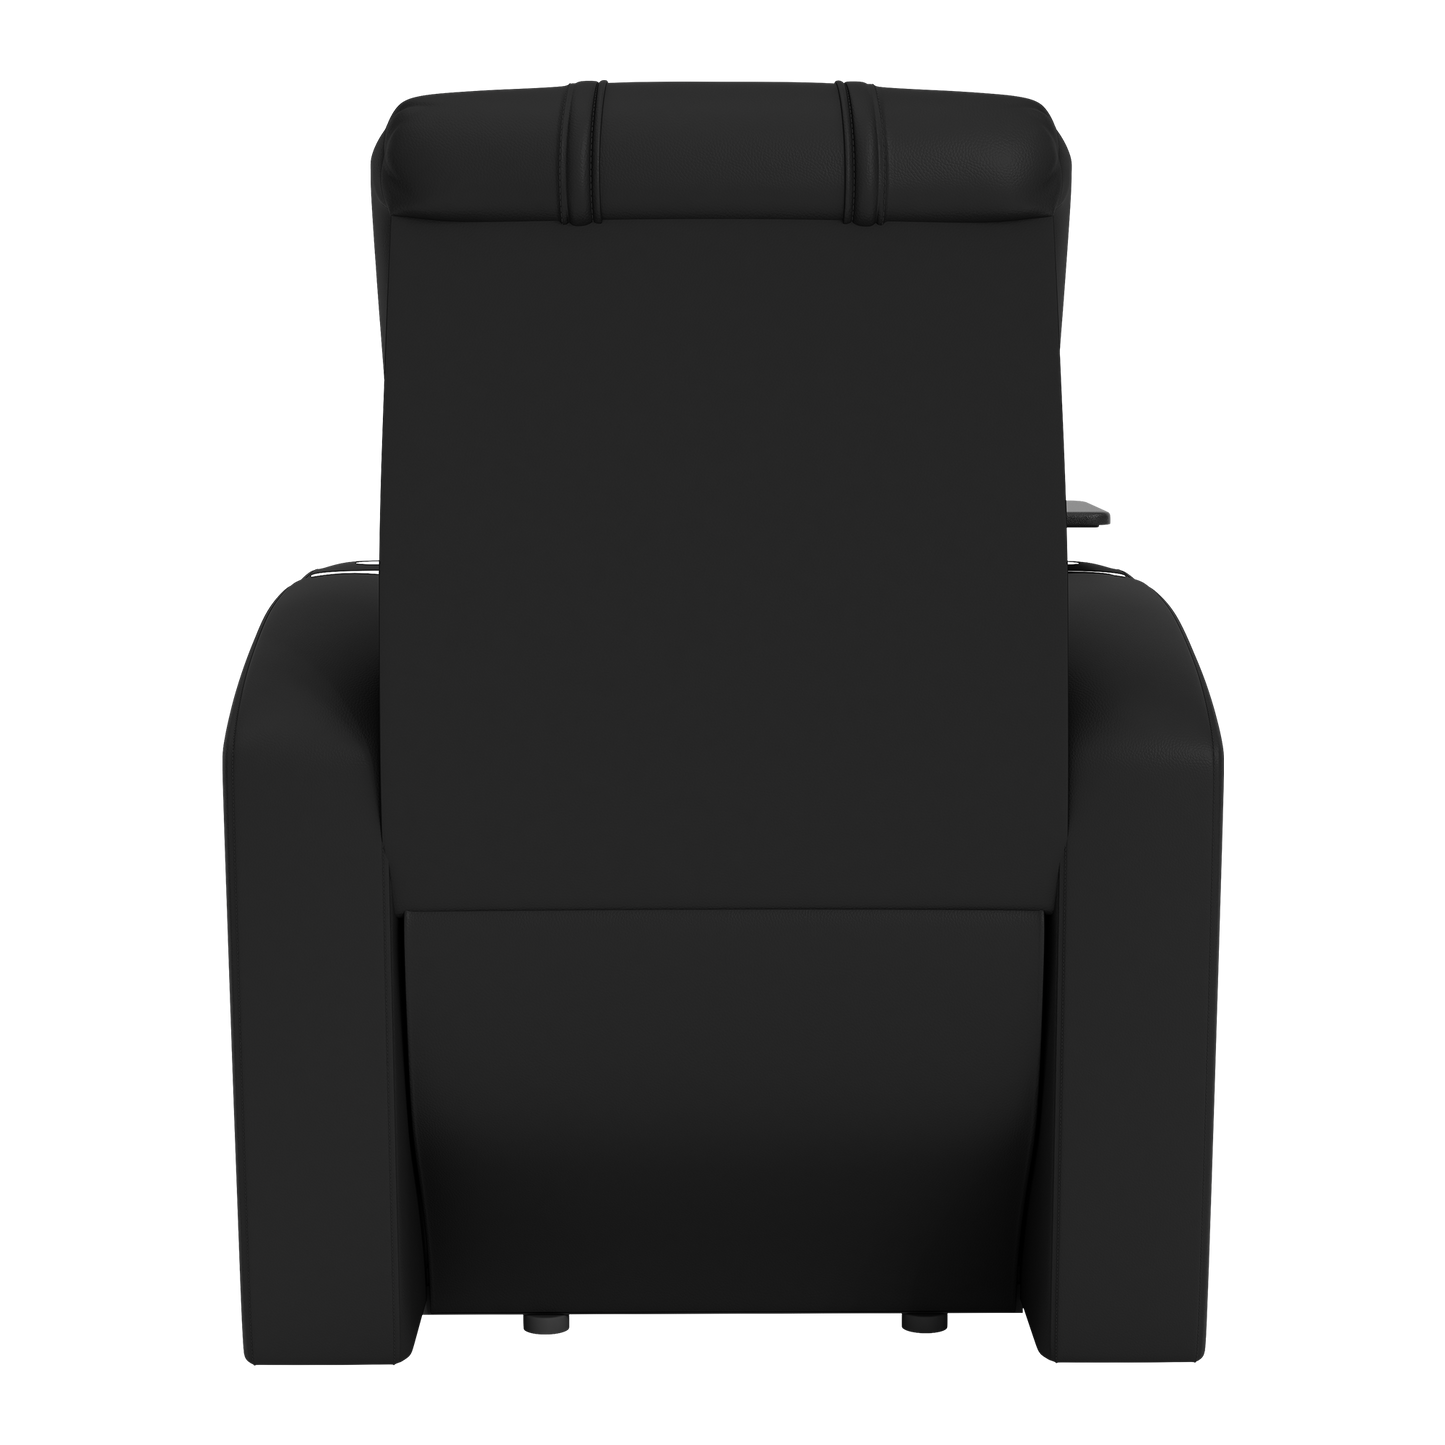 Stealth Power Plus Recliner with New Jersey Devils Logo